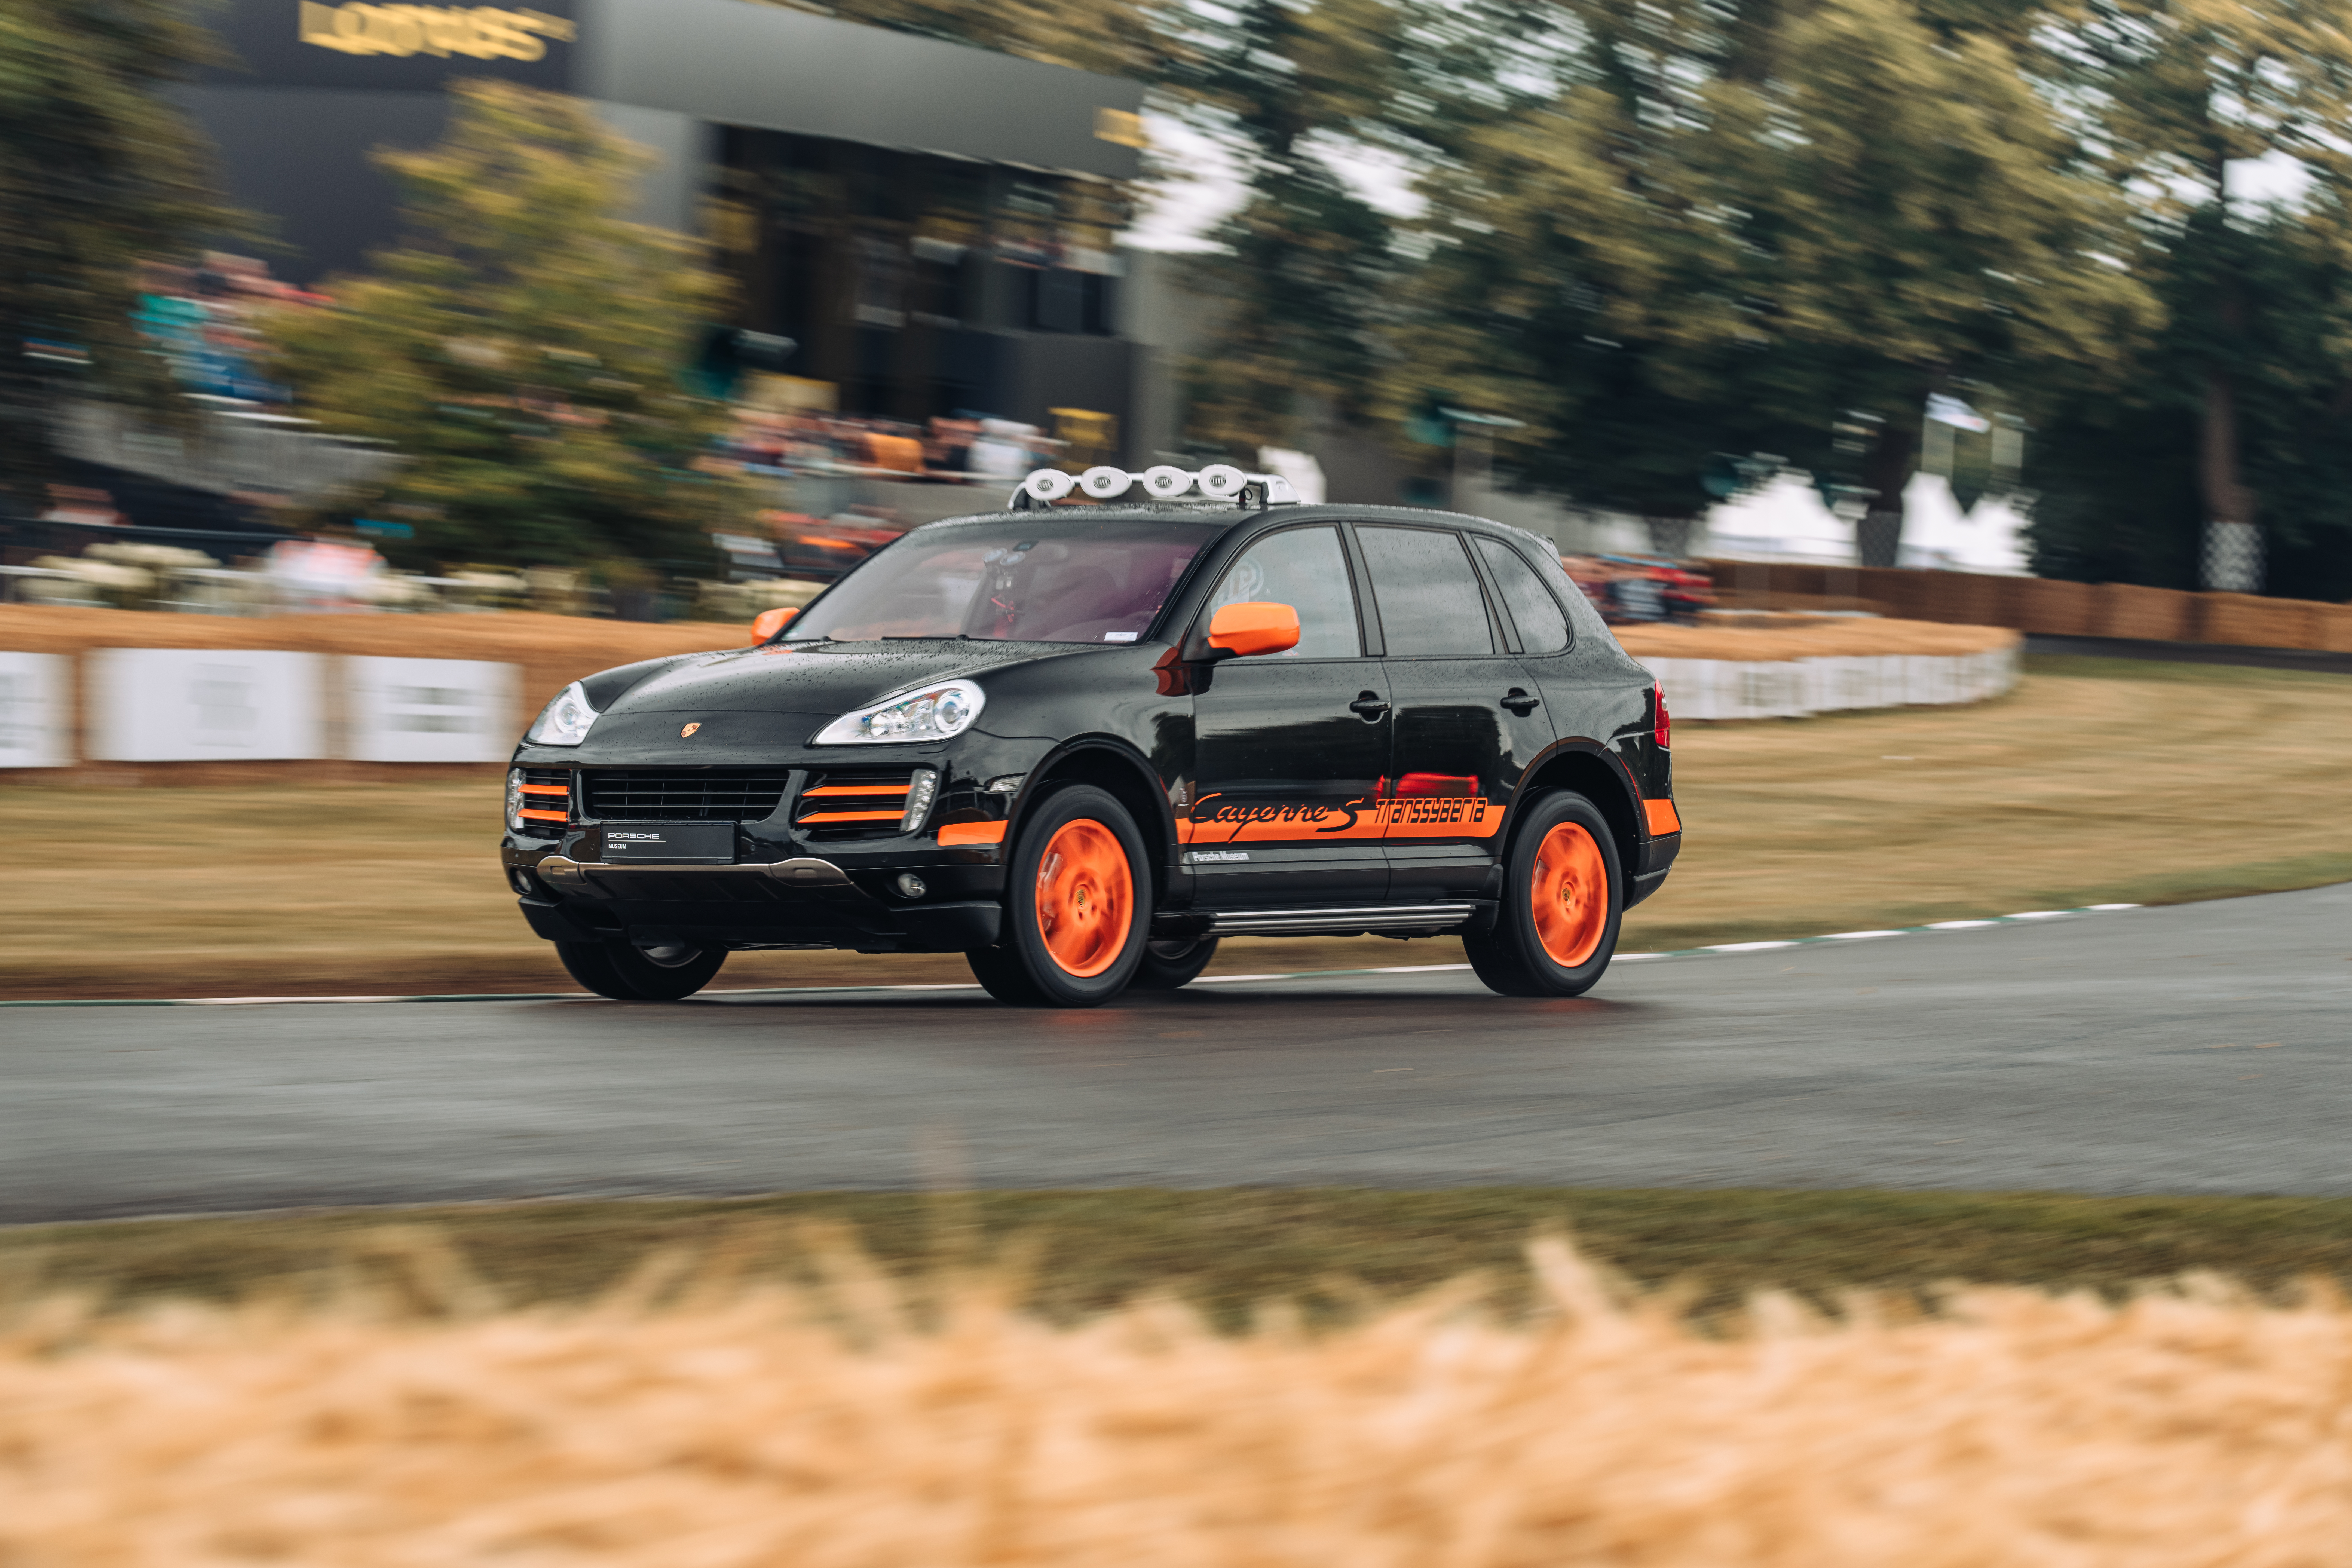 Porsche Cayenne Transsyberia Edition at Goodwood Festival of Speed 2023